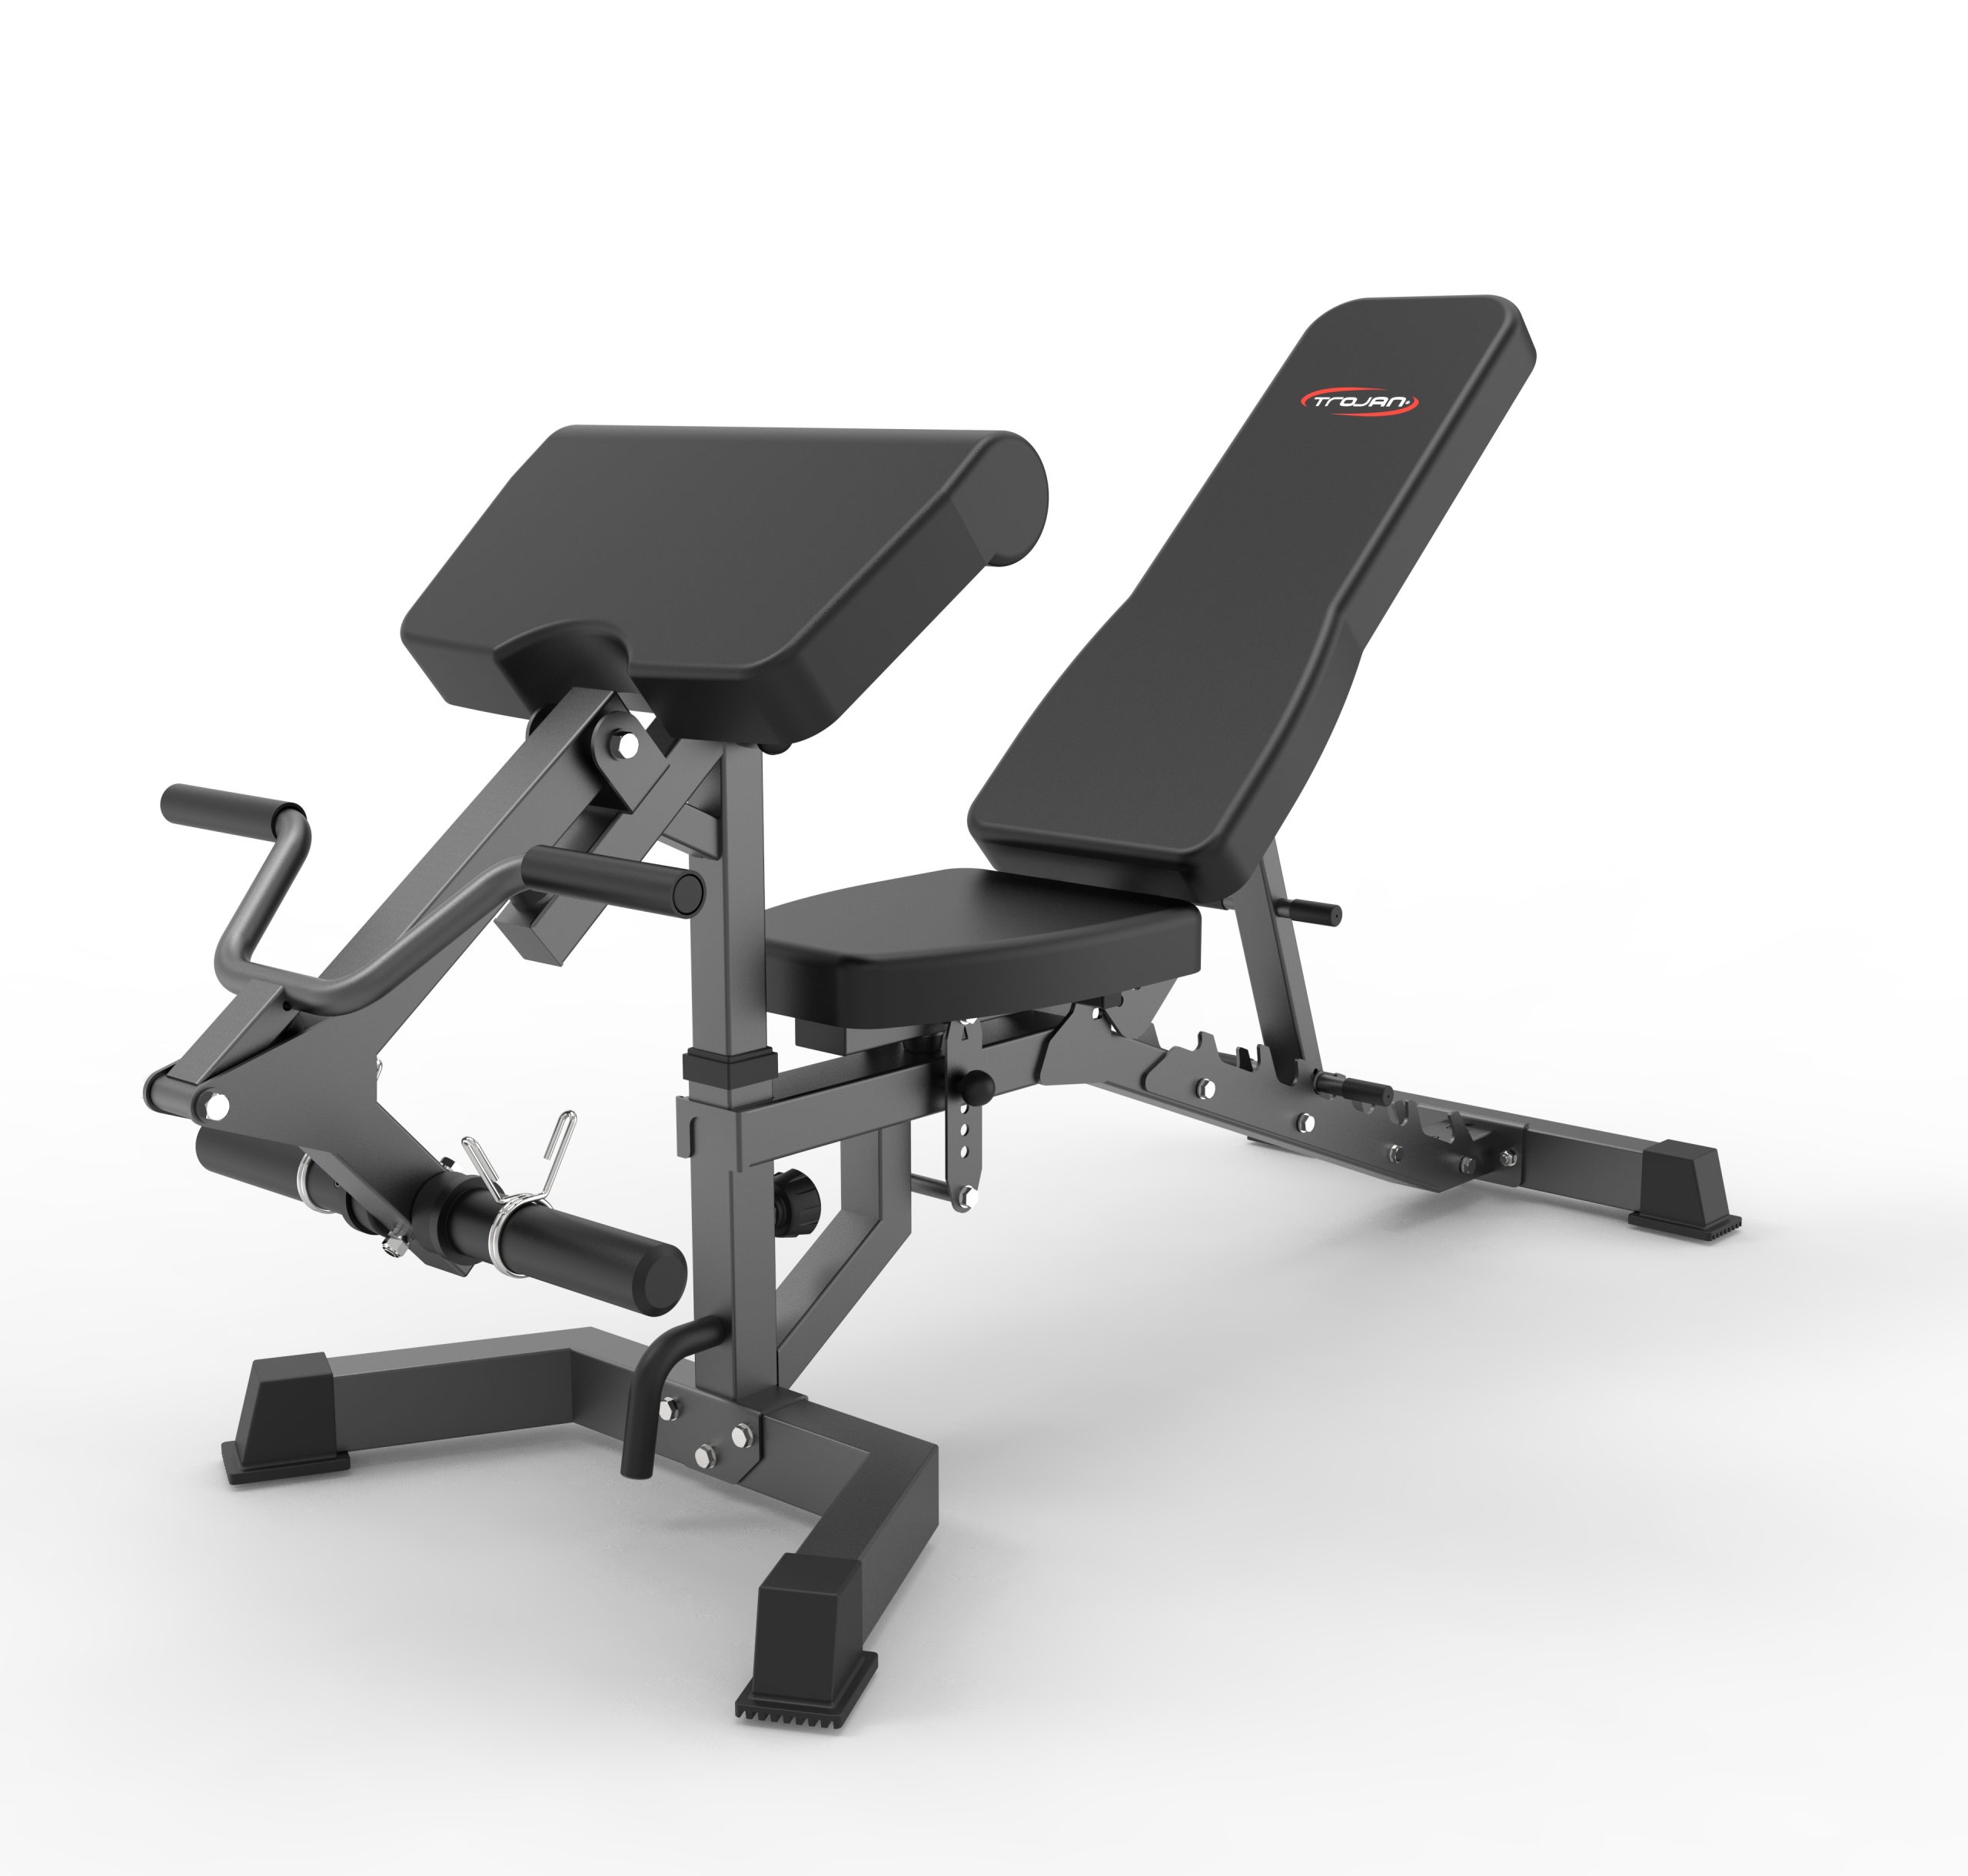 Exercise Bench PRO FID Heavy Duty New Design Inc Preacher Pad & Plate Load